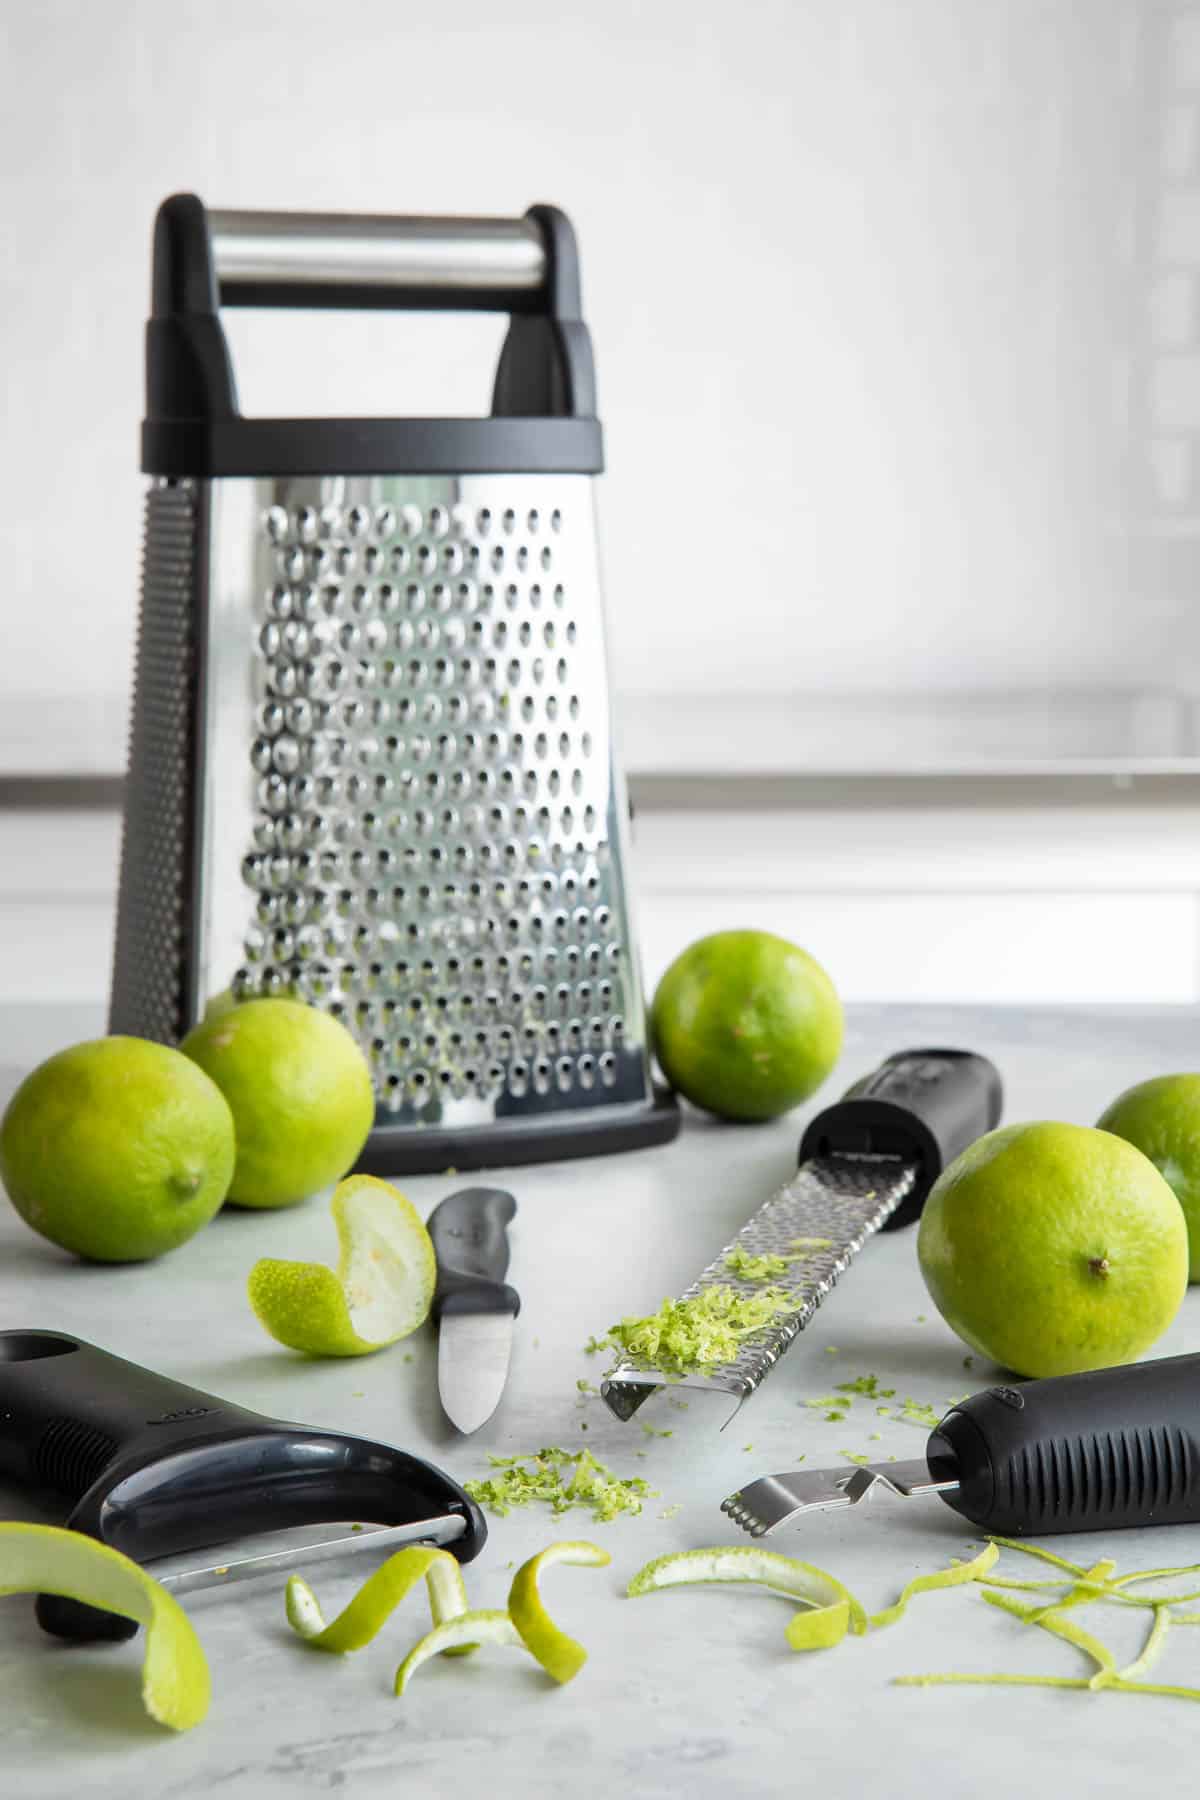 Zested limes and tools to zest a lime on a countertop.